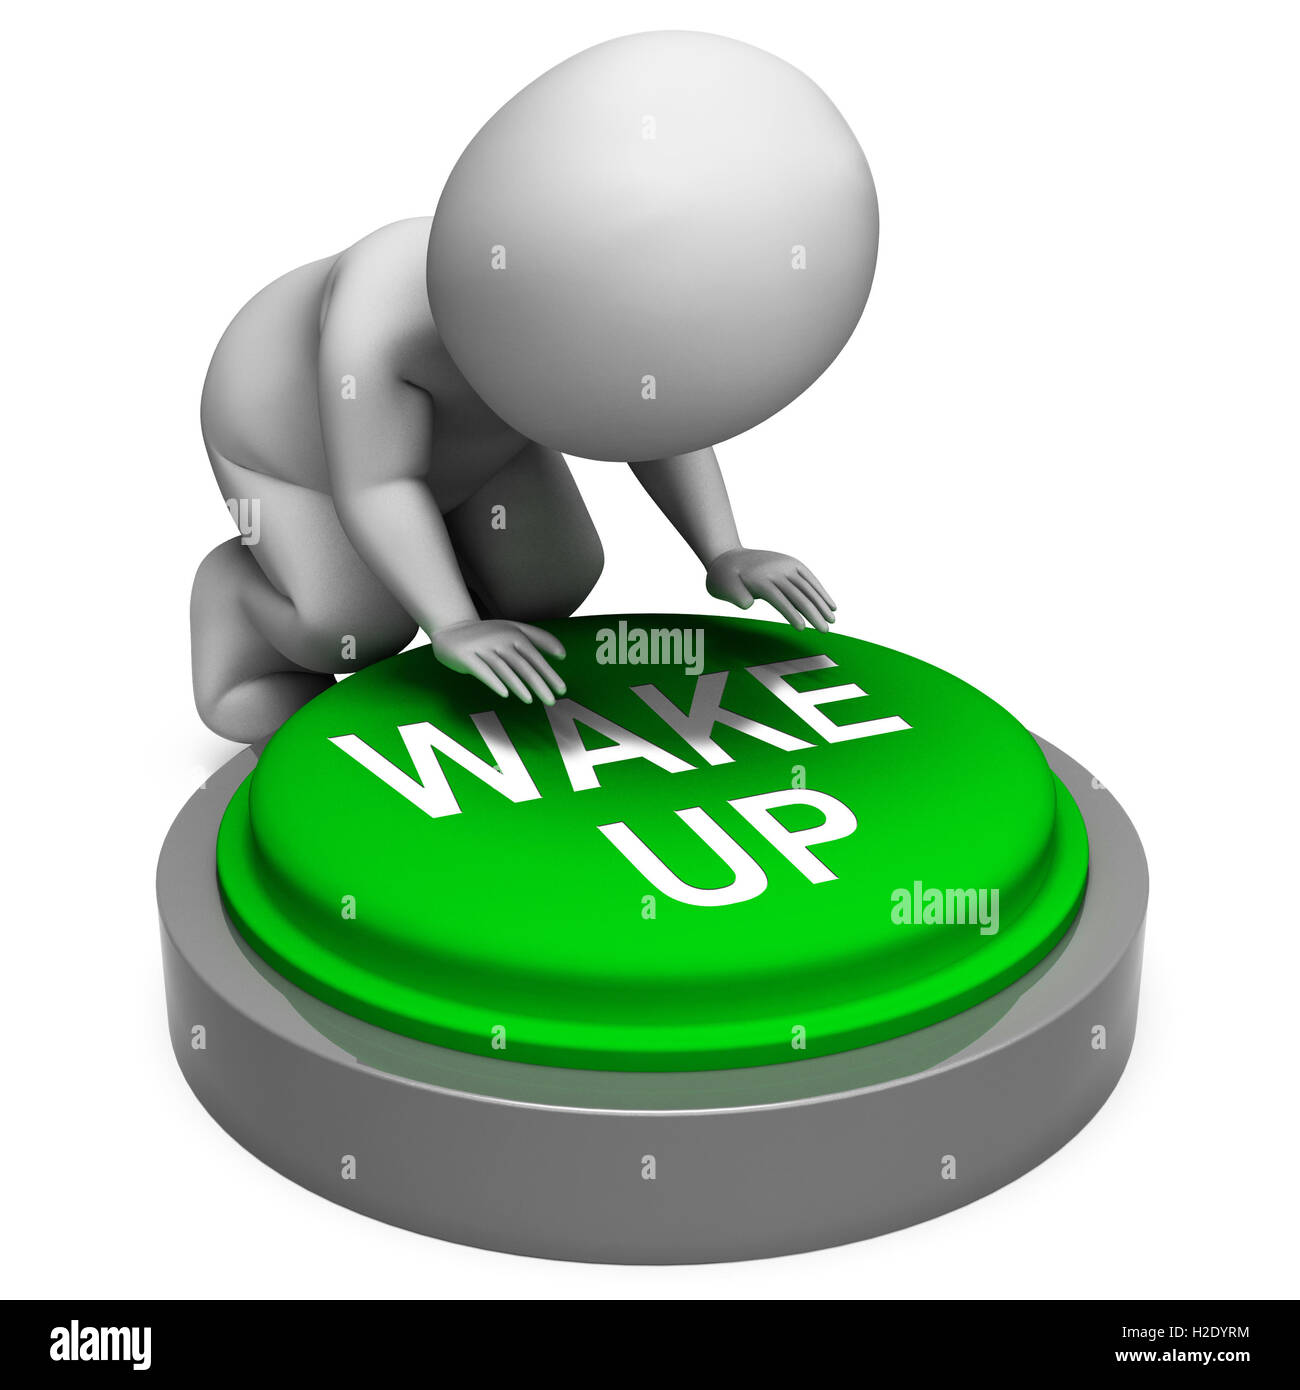 Wake Up Button Shows Alarm And Rising Stock Photo